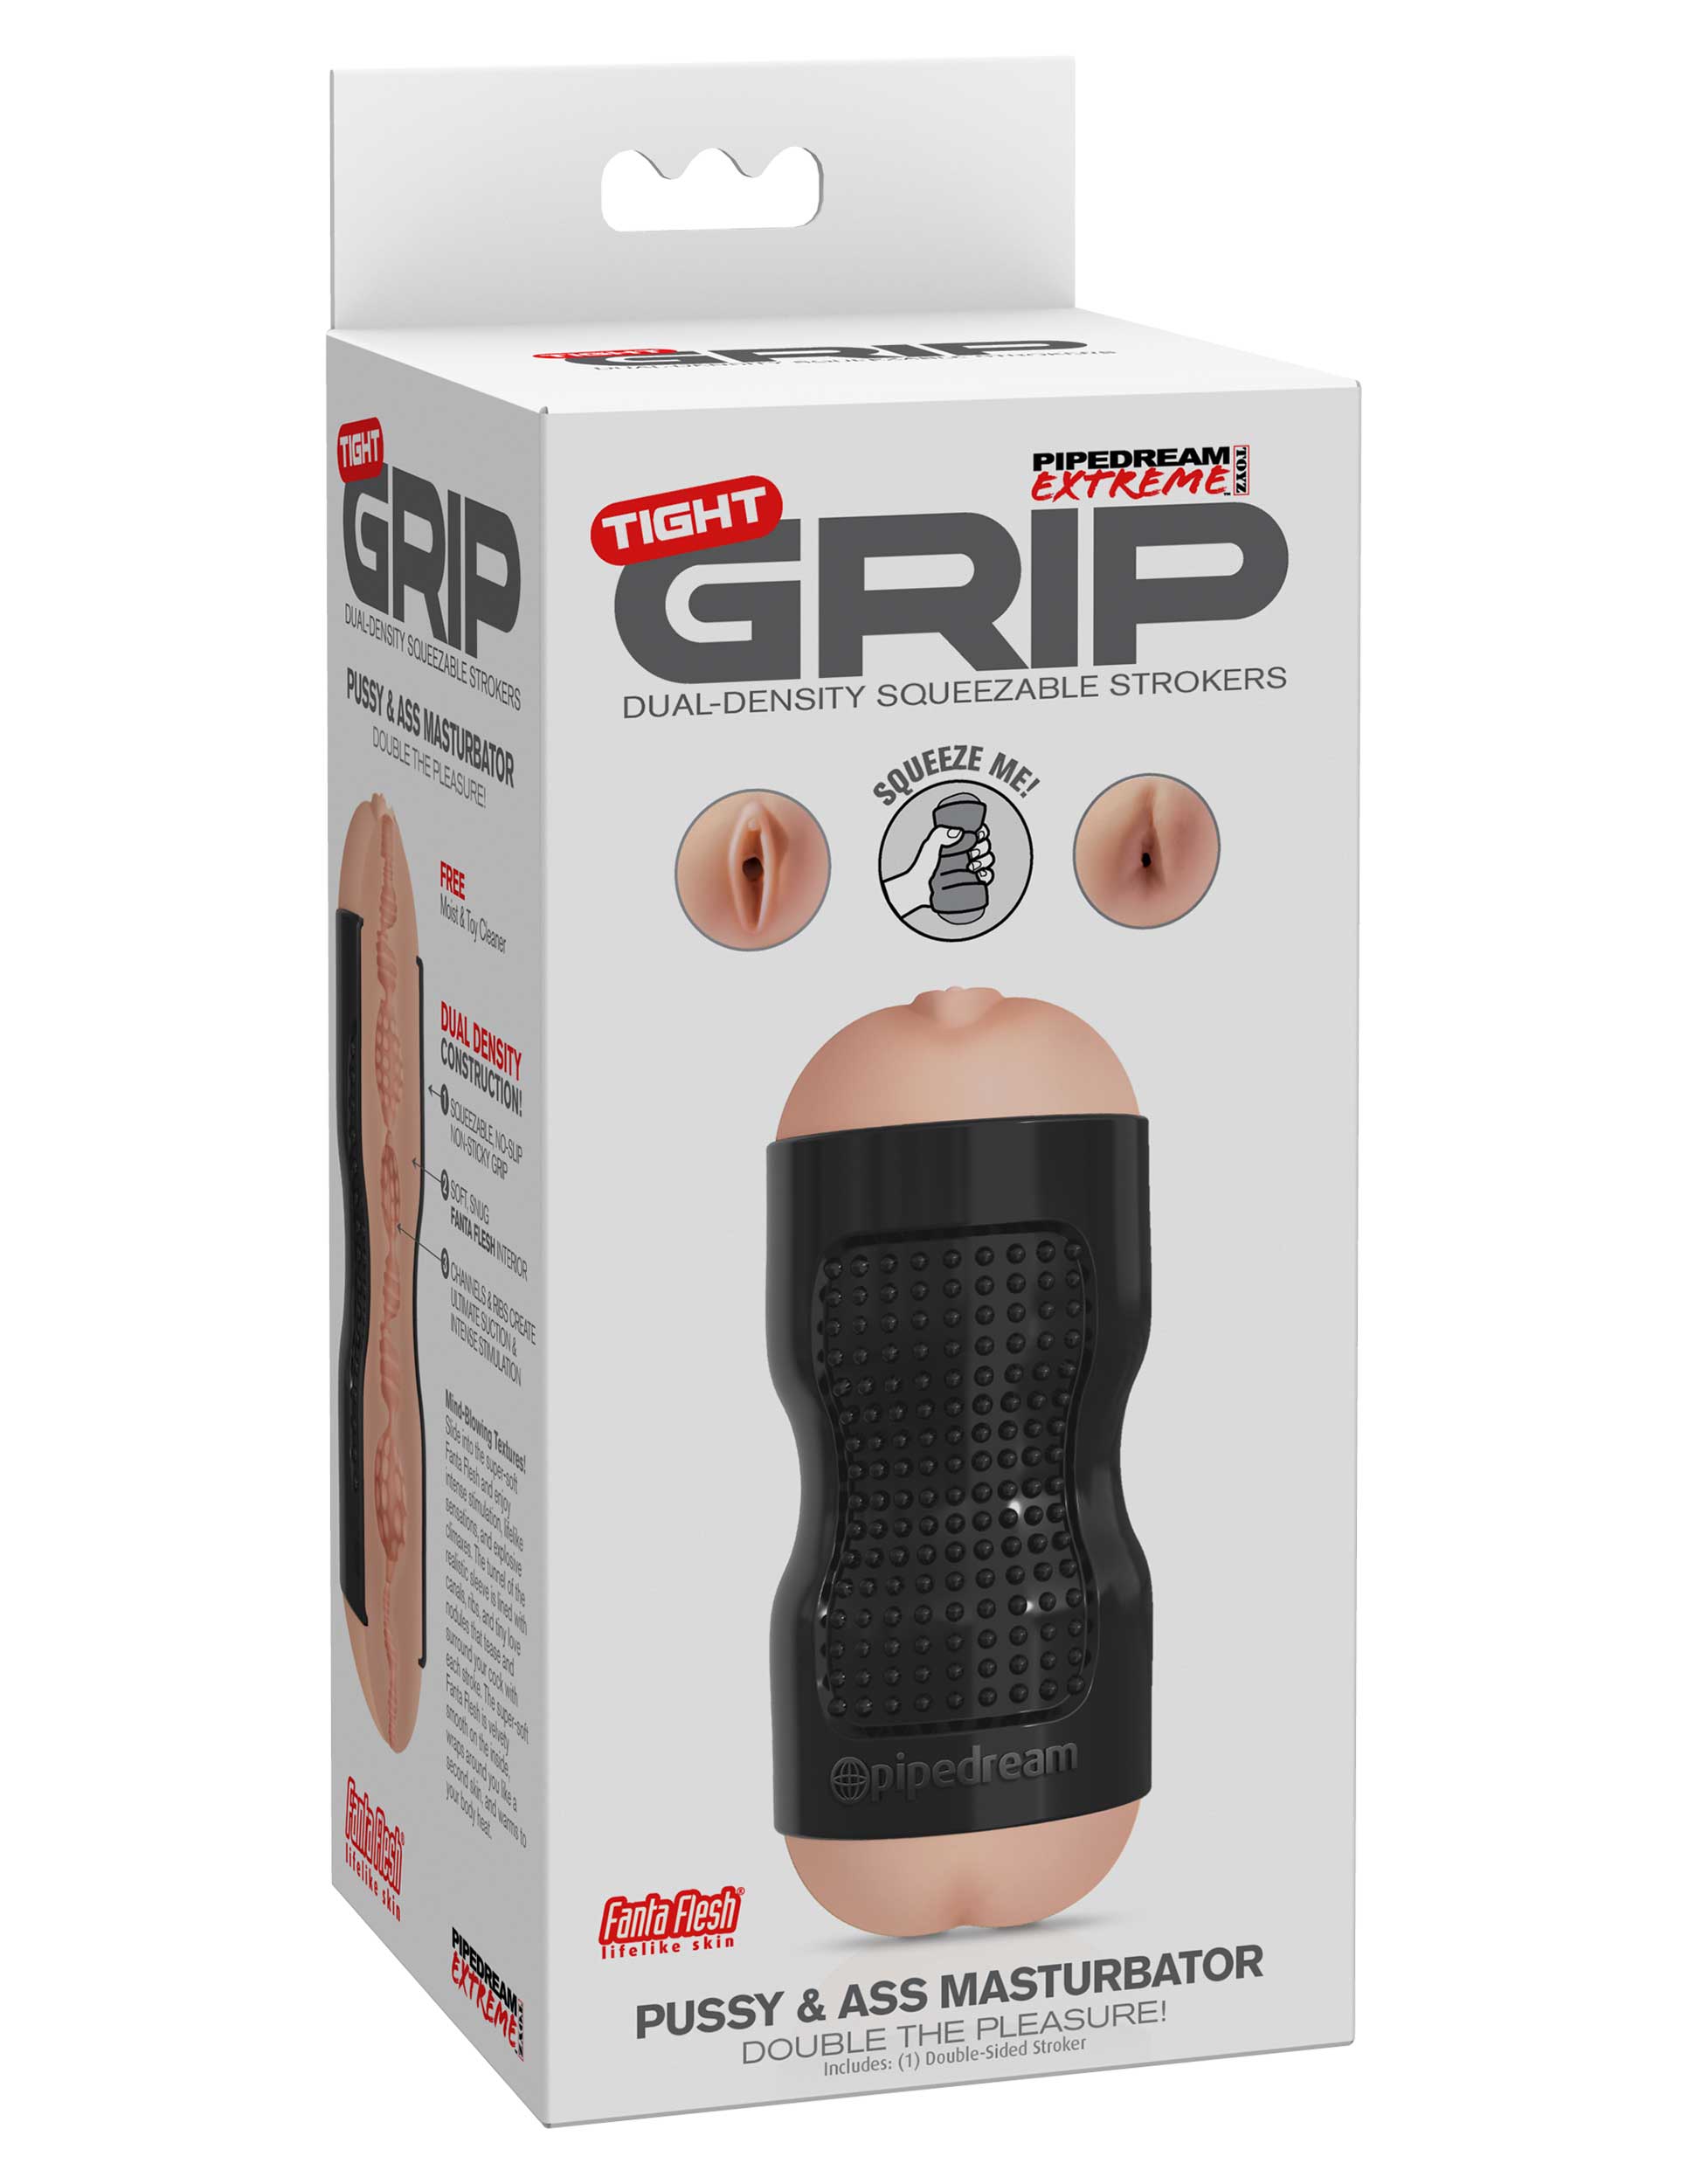 Pipedream Extreme Toyz Tight Grip Dual Density Squeezable Strokers | Pussy & Ass